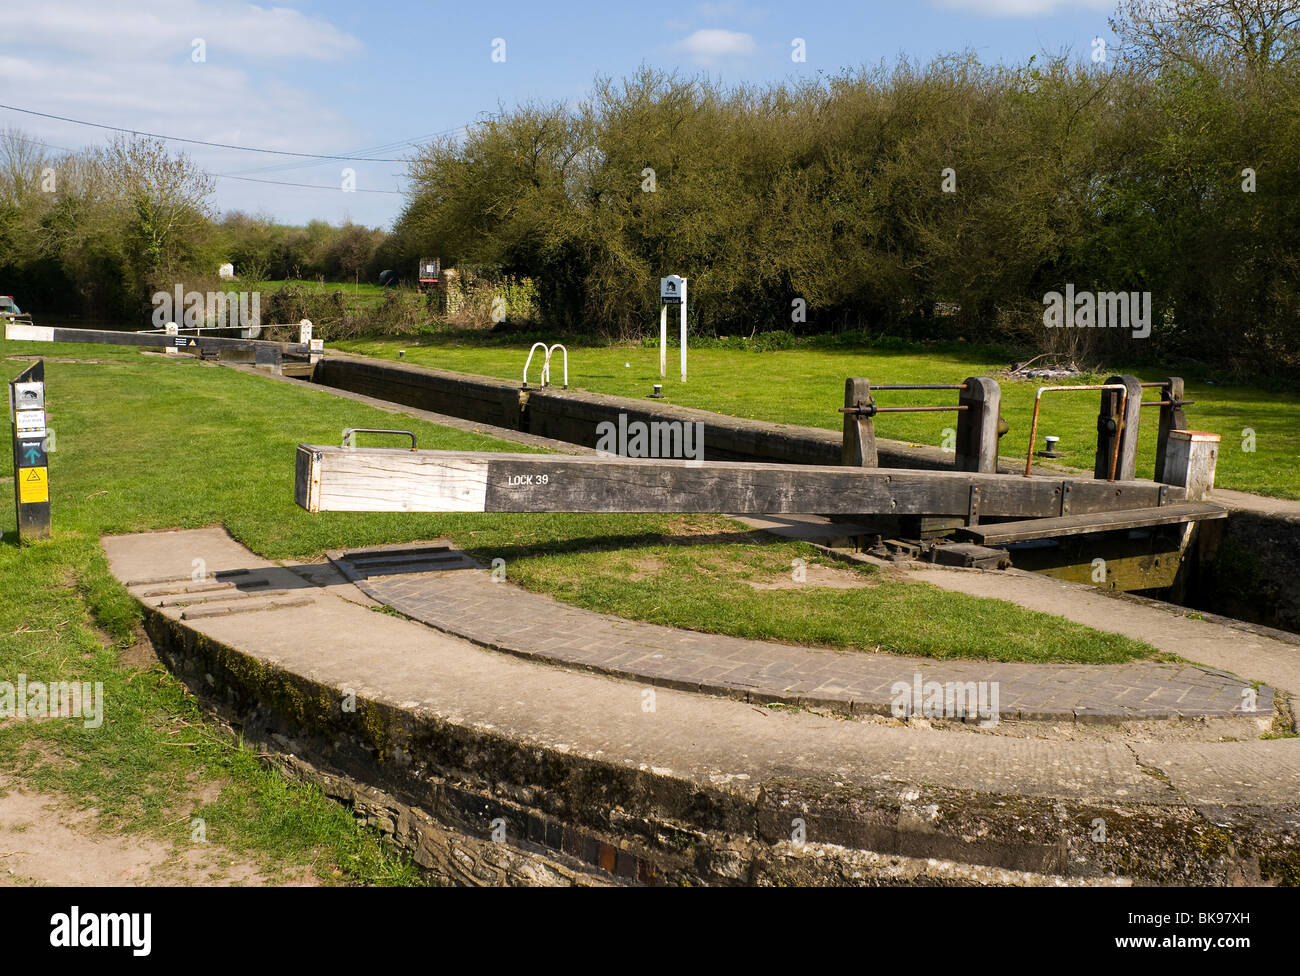 Pigeon's lock in Tackley on the Oxford Canal, named after the pub The Three Pigeons, which used to stand near here. Stock Photo